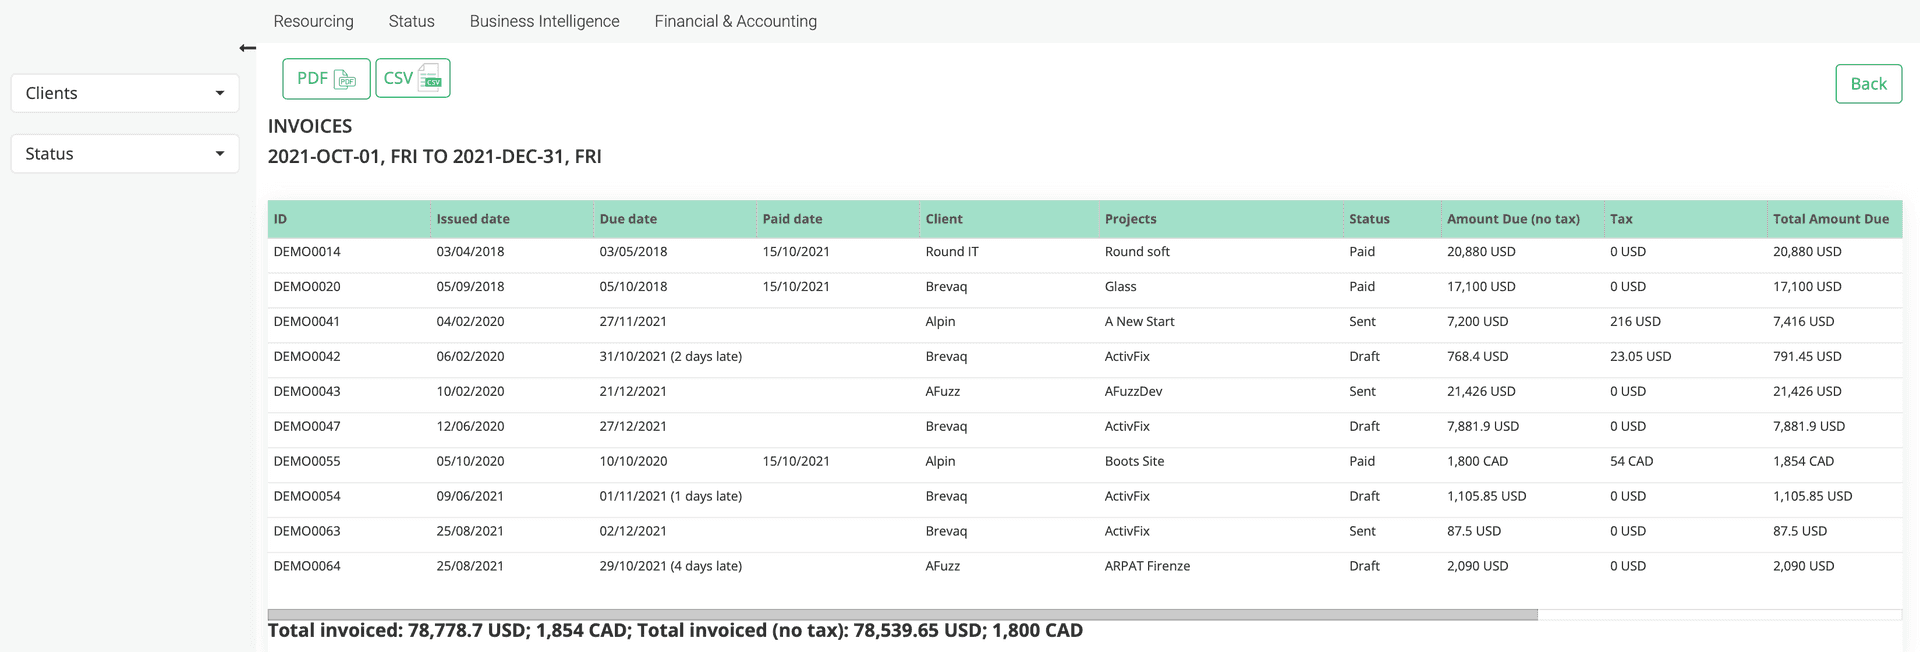 Detailed report with all issued invoices and their status.